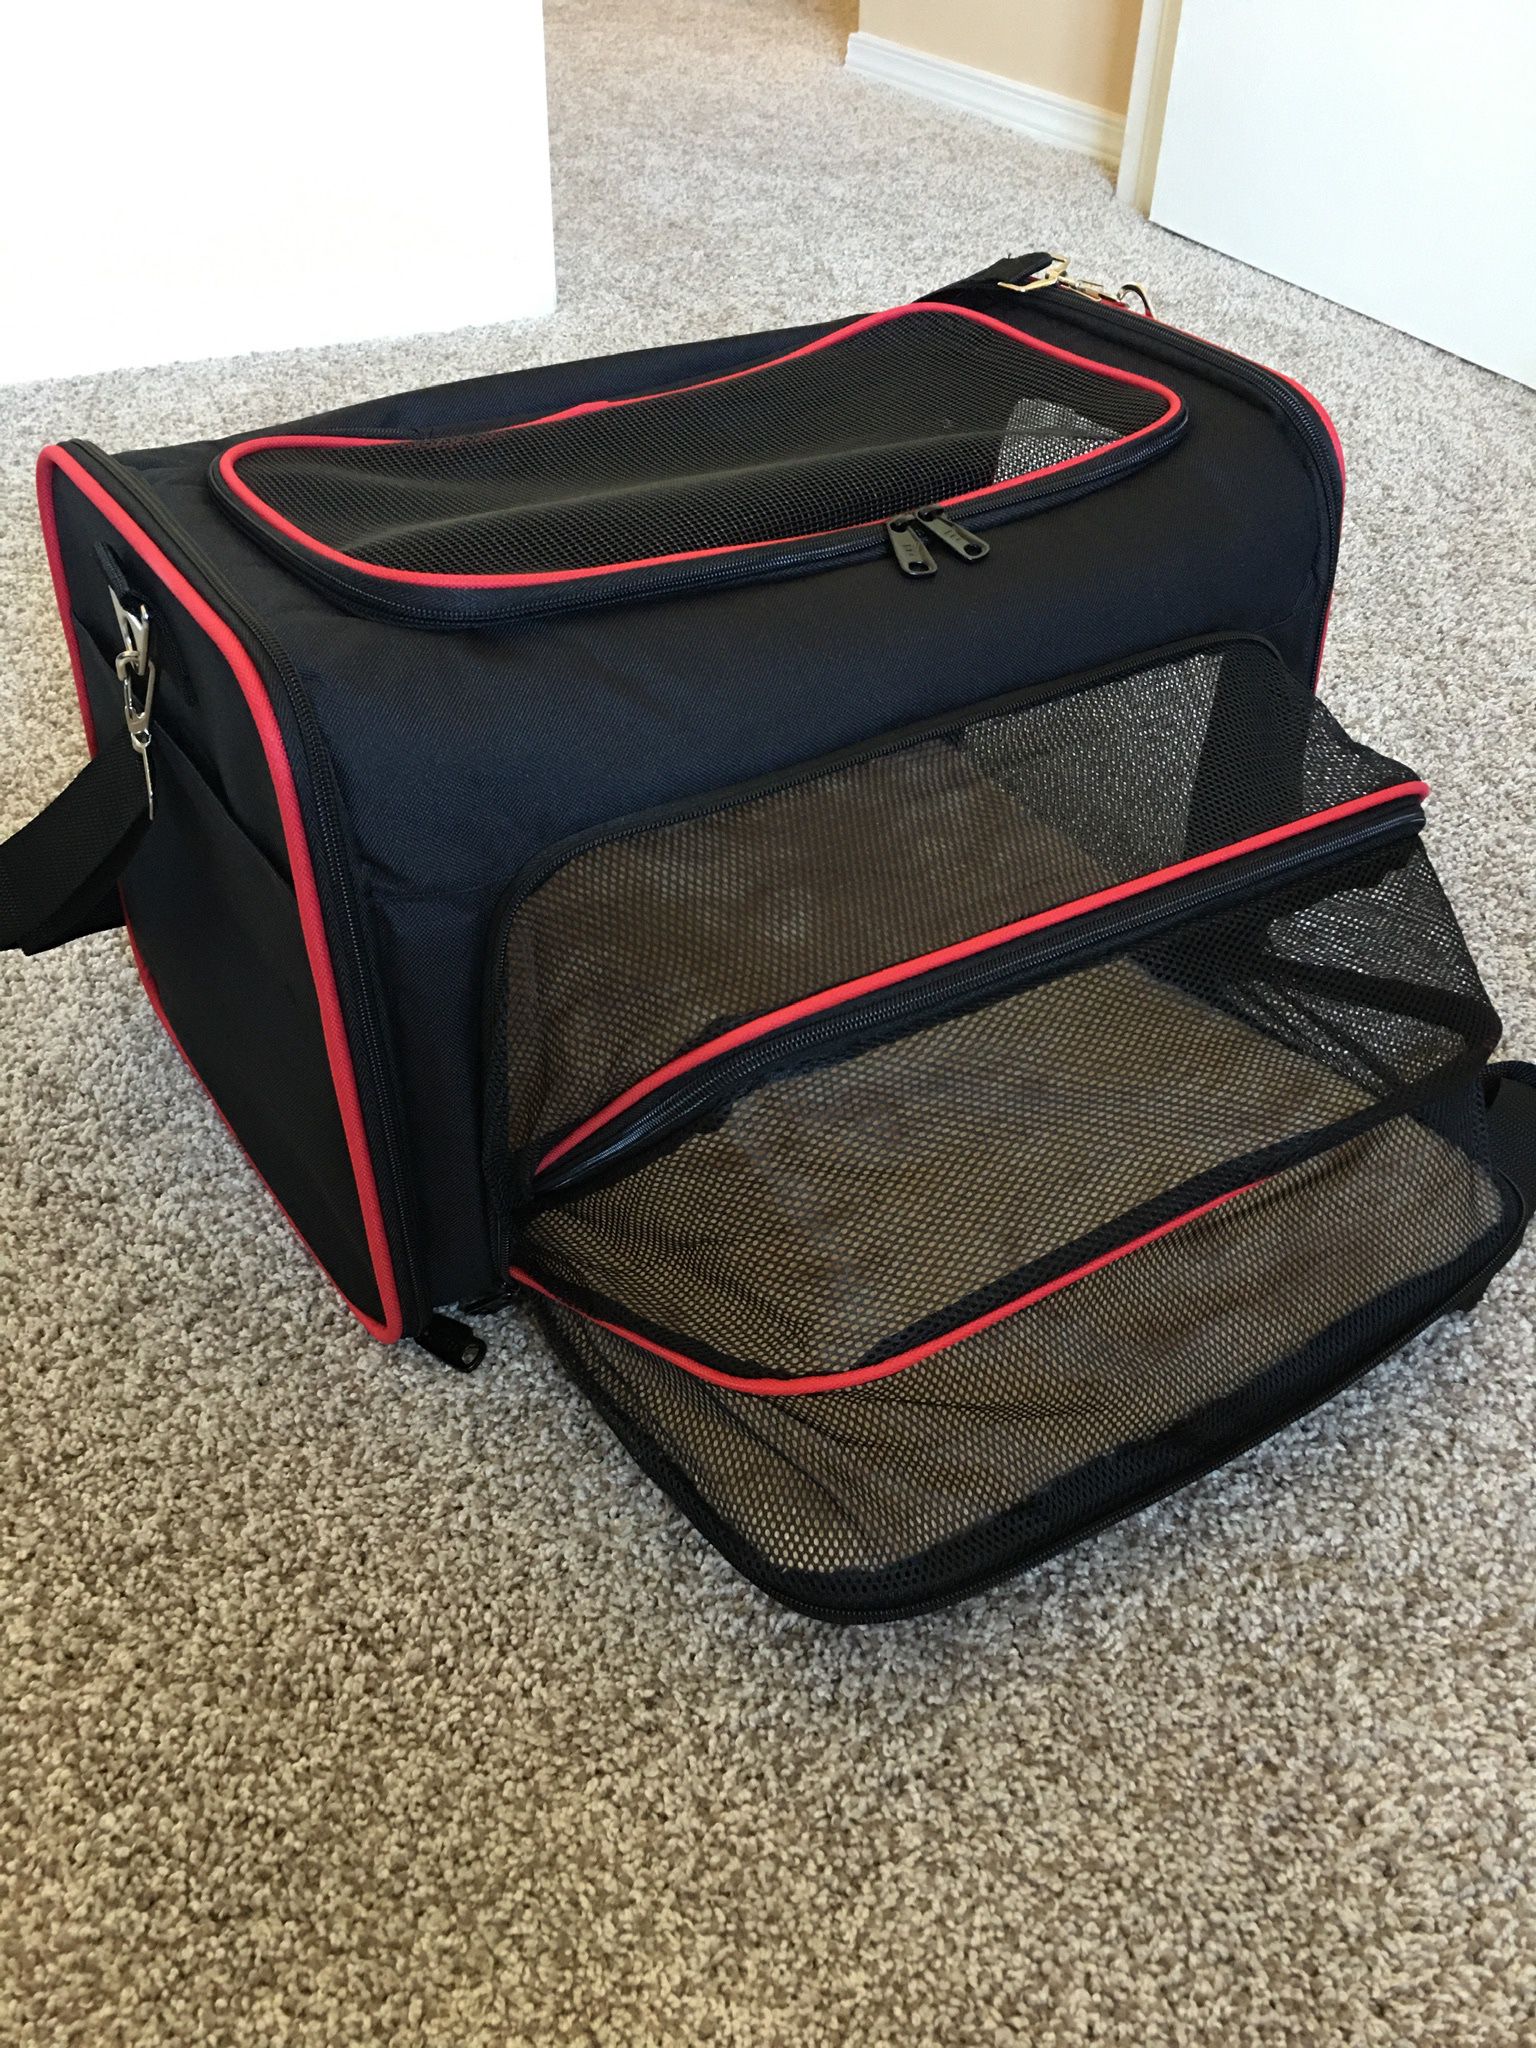 Petopia Softe Sided Pet Carrier Dog&Cat Airline Approved Travel Bag&CarSeat Crat